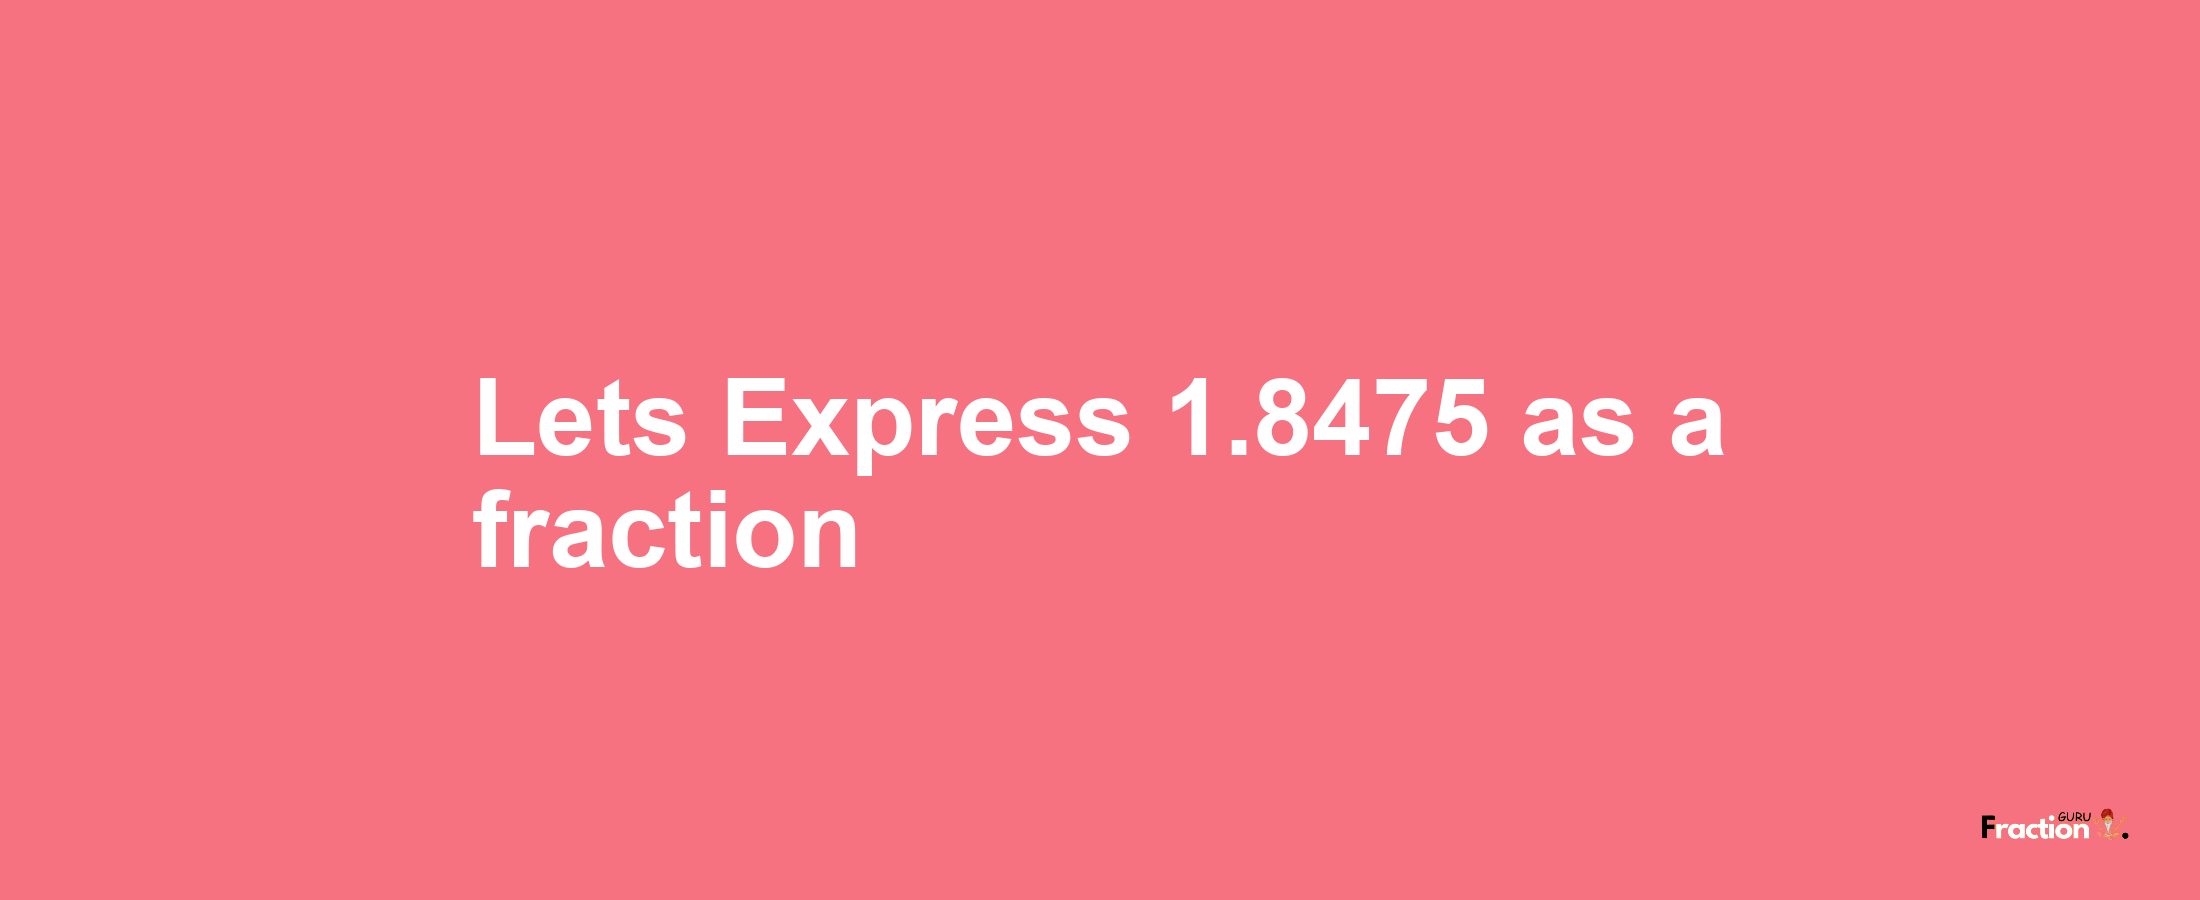 Lets Express 1.8475 as afraction